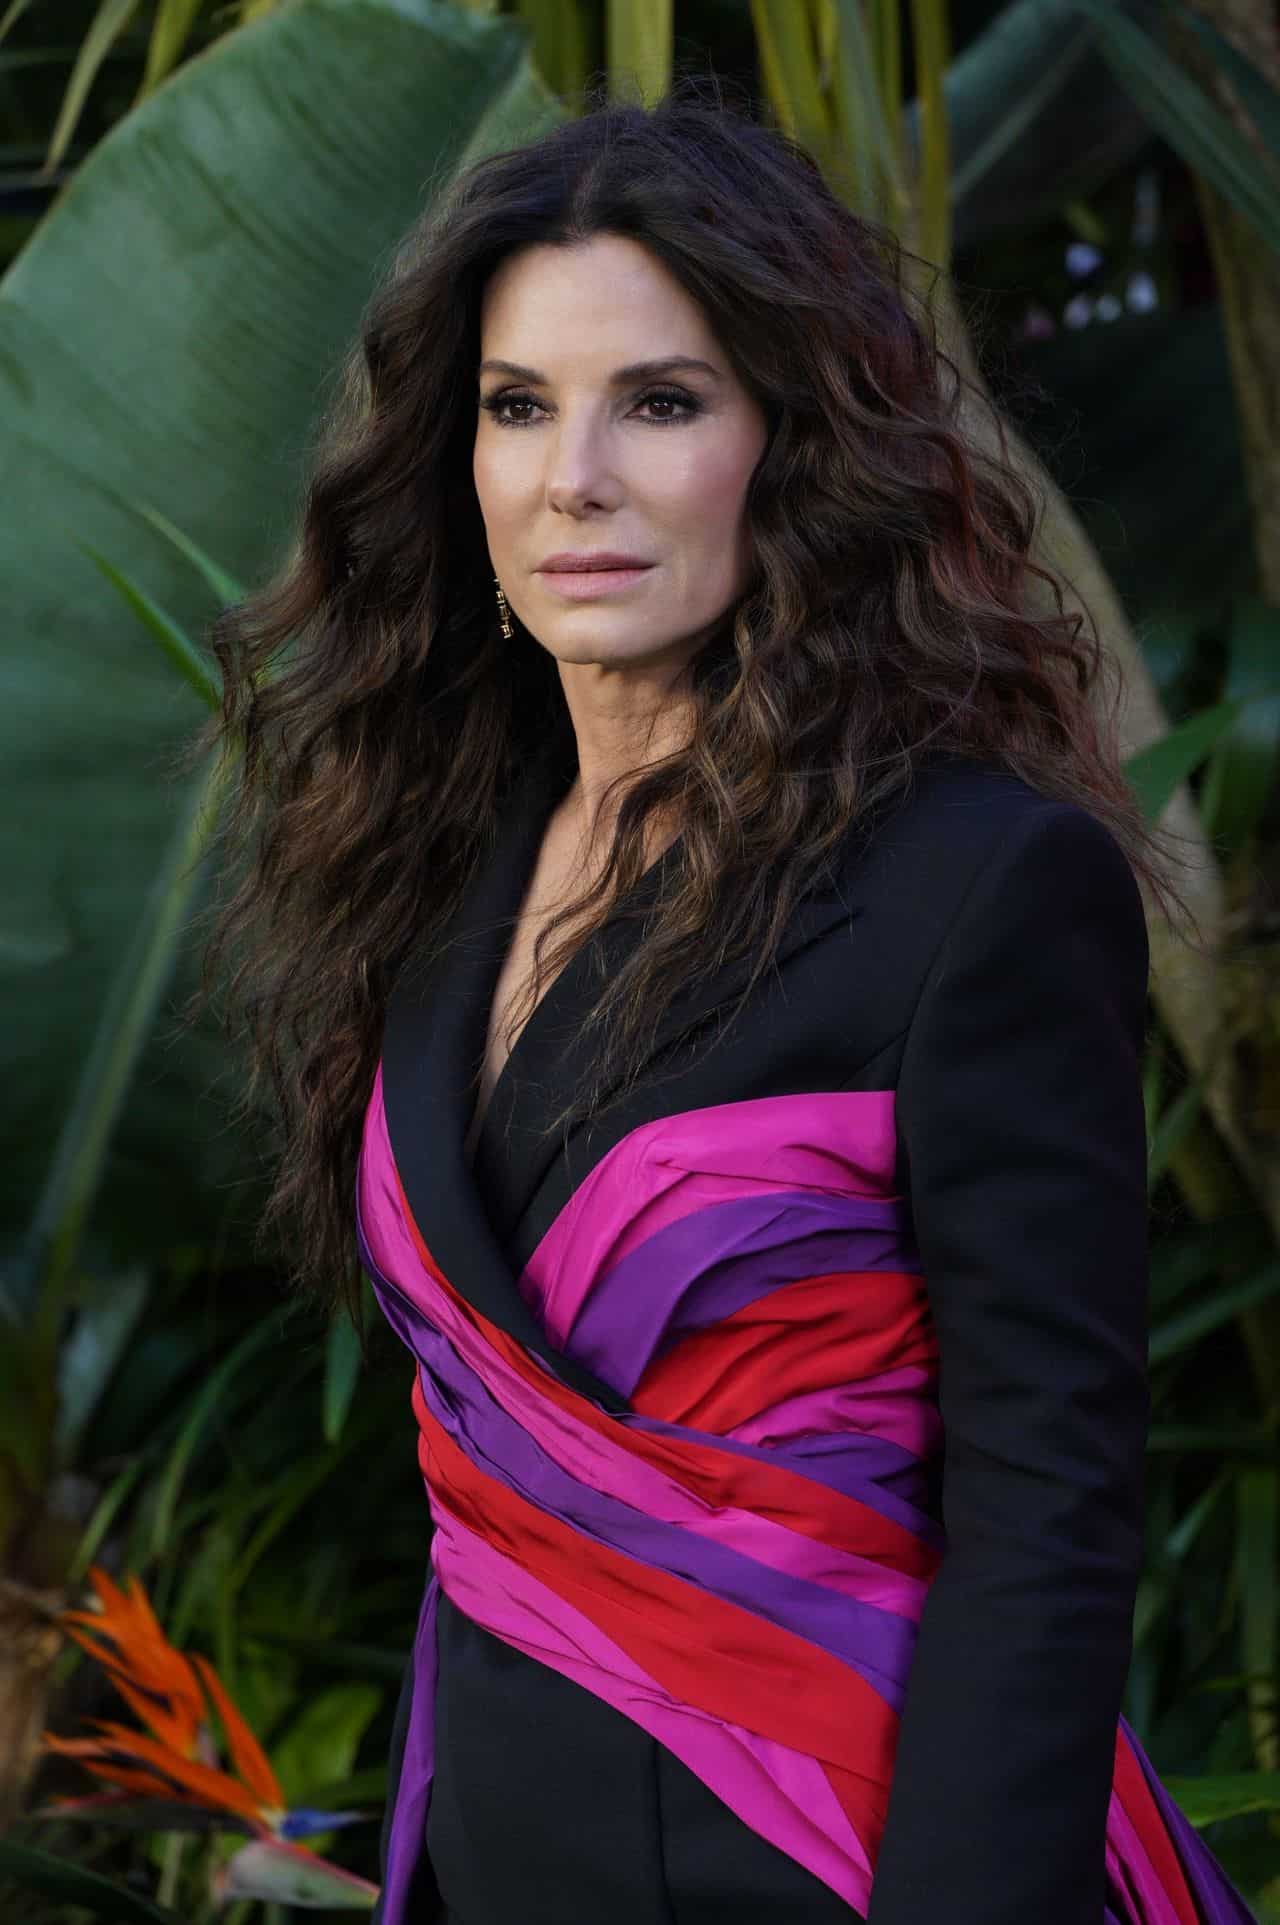 Sandra Bullock in a Chic Pantsuit at the "The Lost City" Premiere in the UK